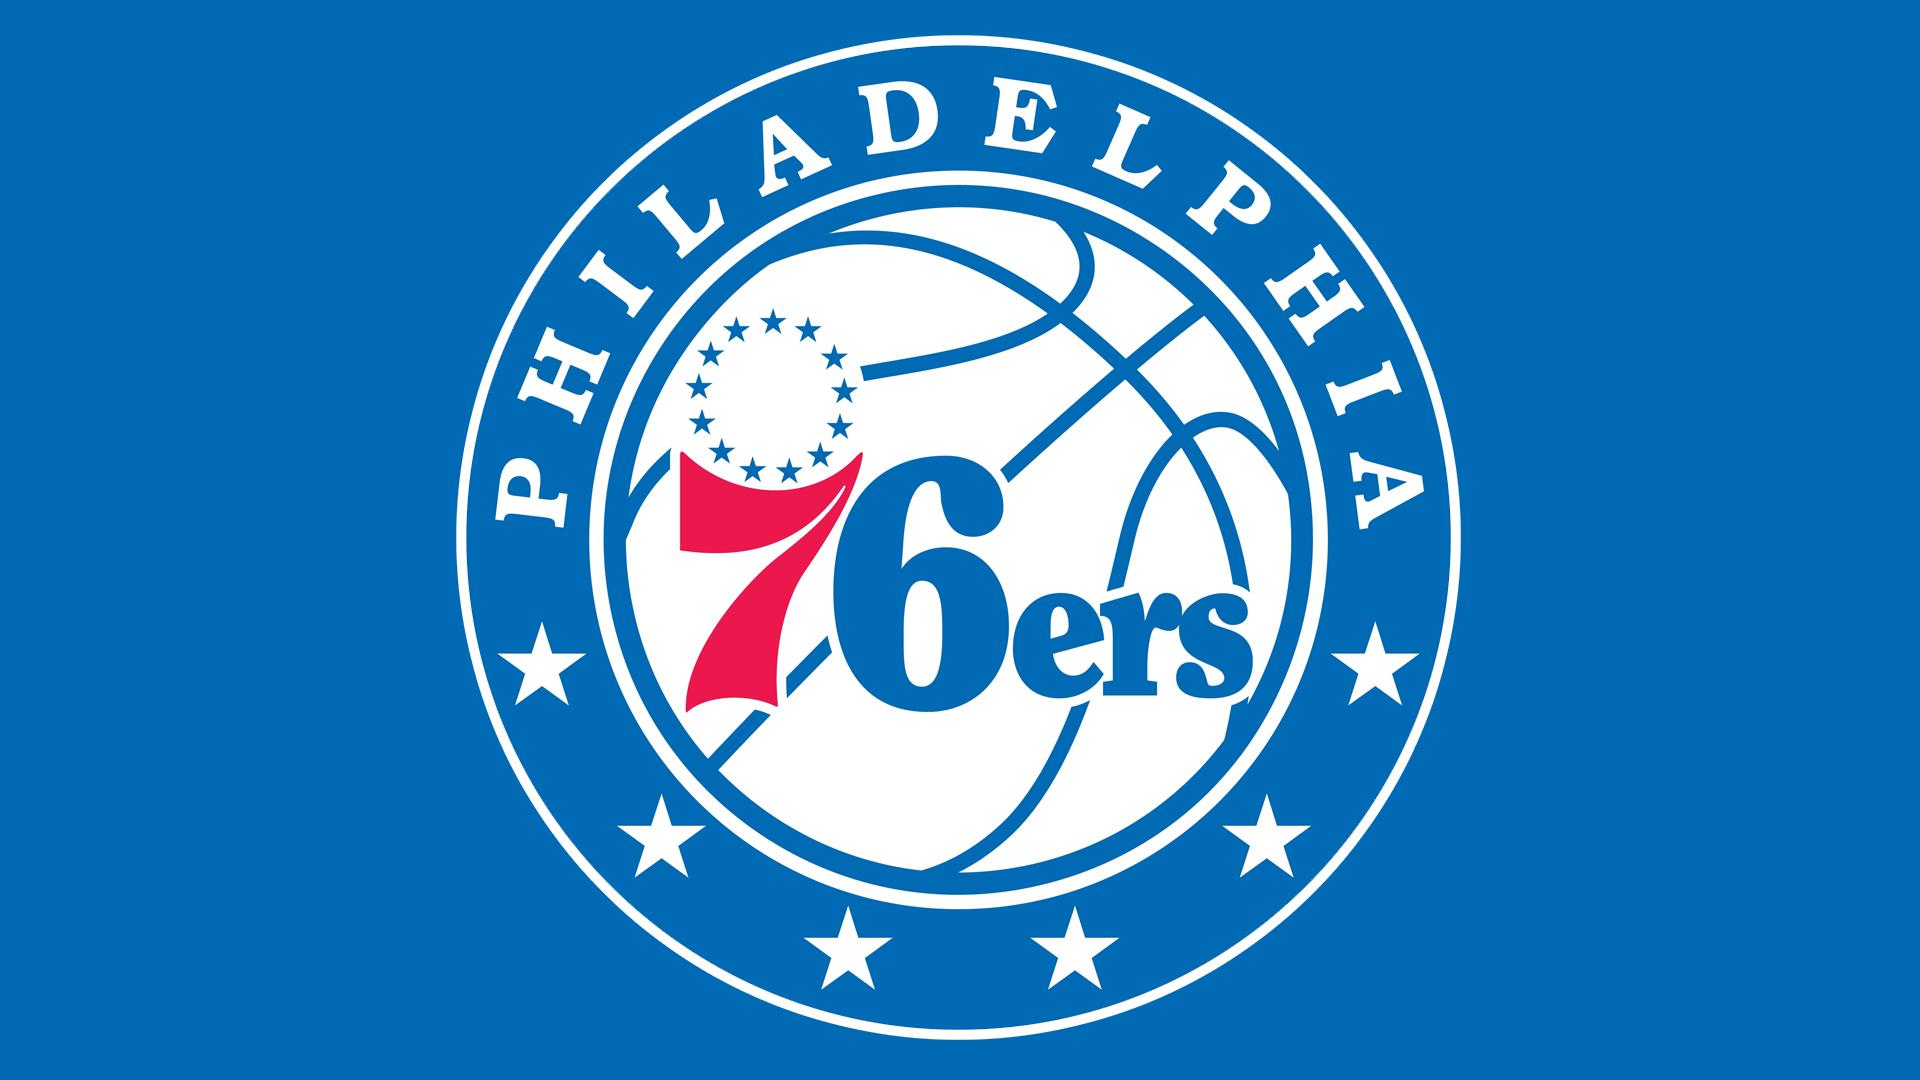 Philadelphia 76ers Logo - Philadelphia 76ers Logo, Philadelphia 76ers Symbol Meaning, History ...